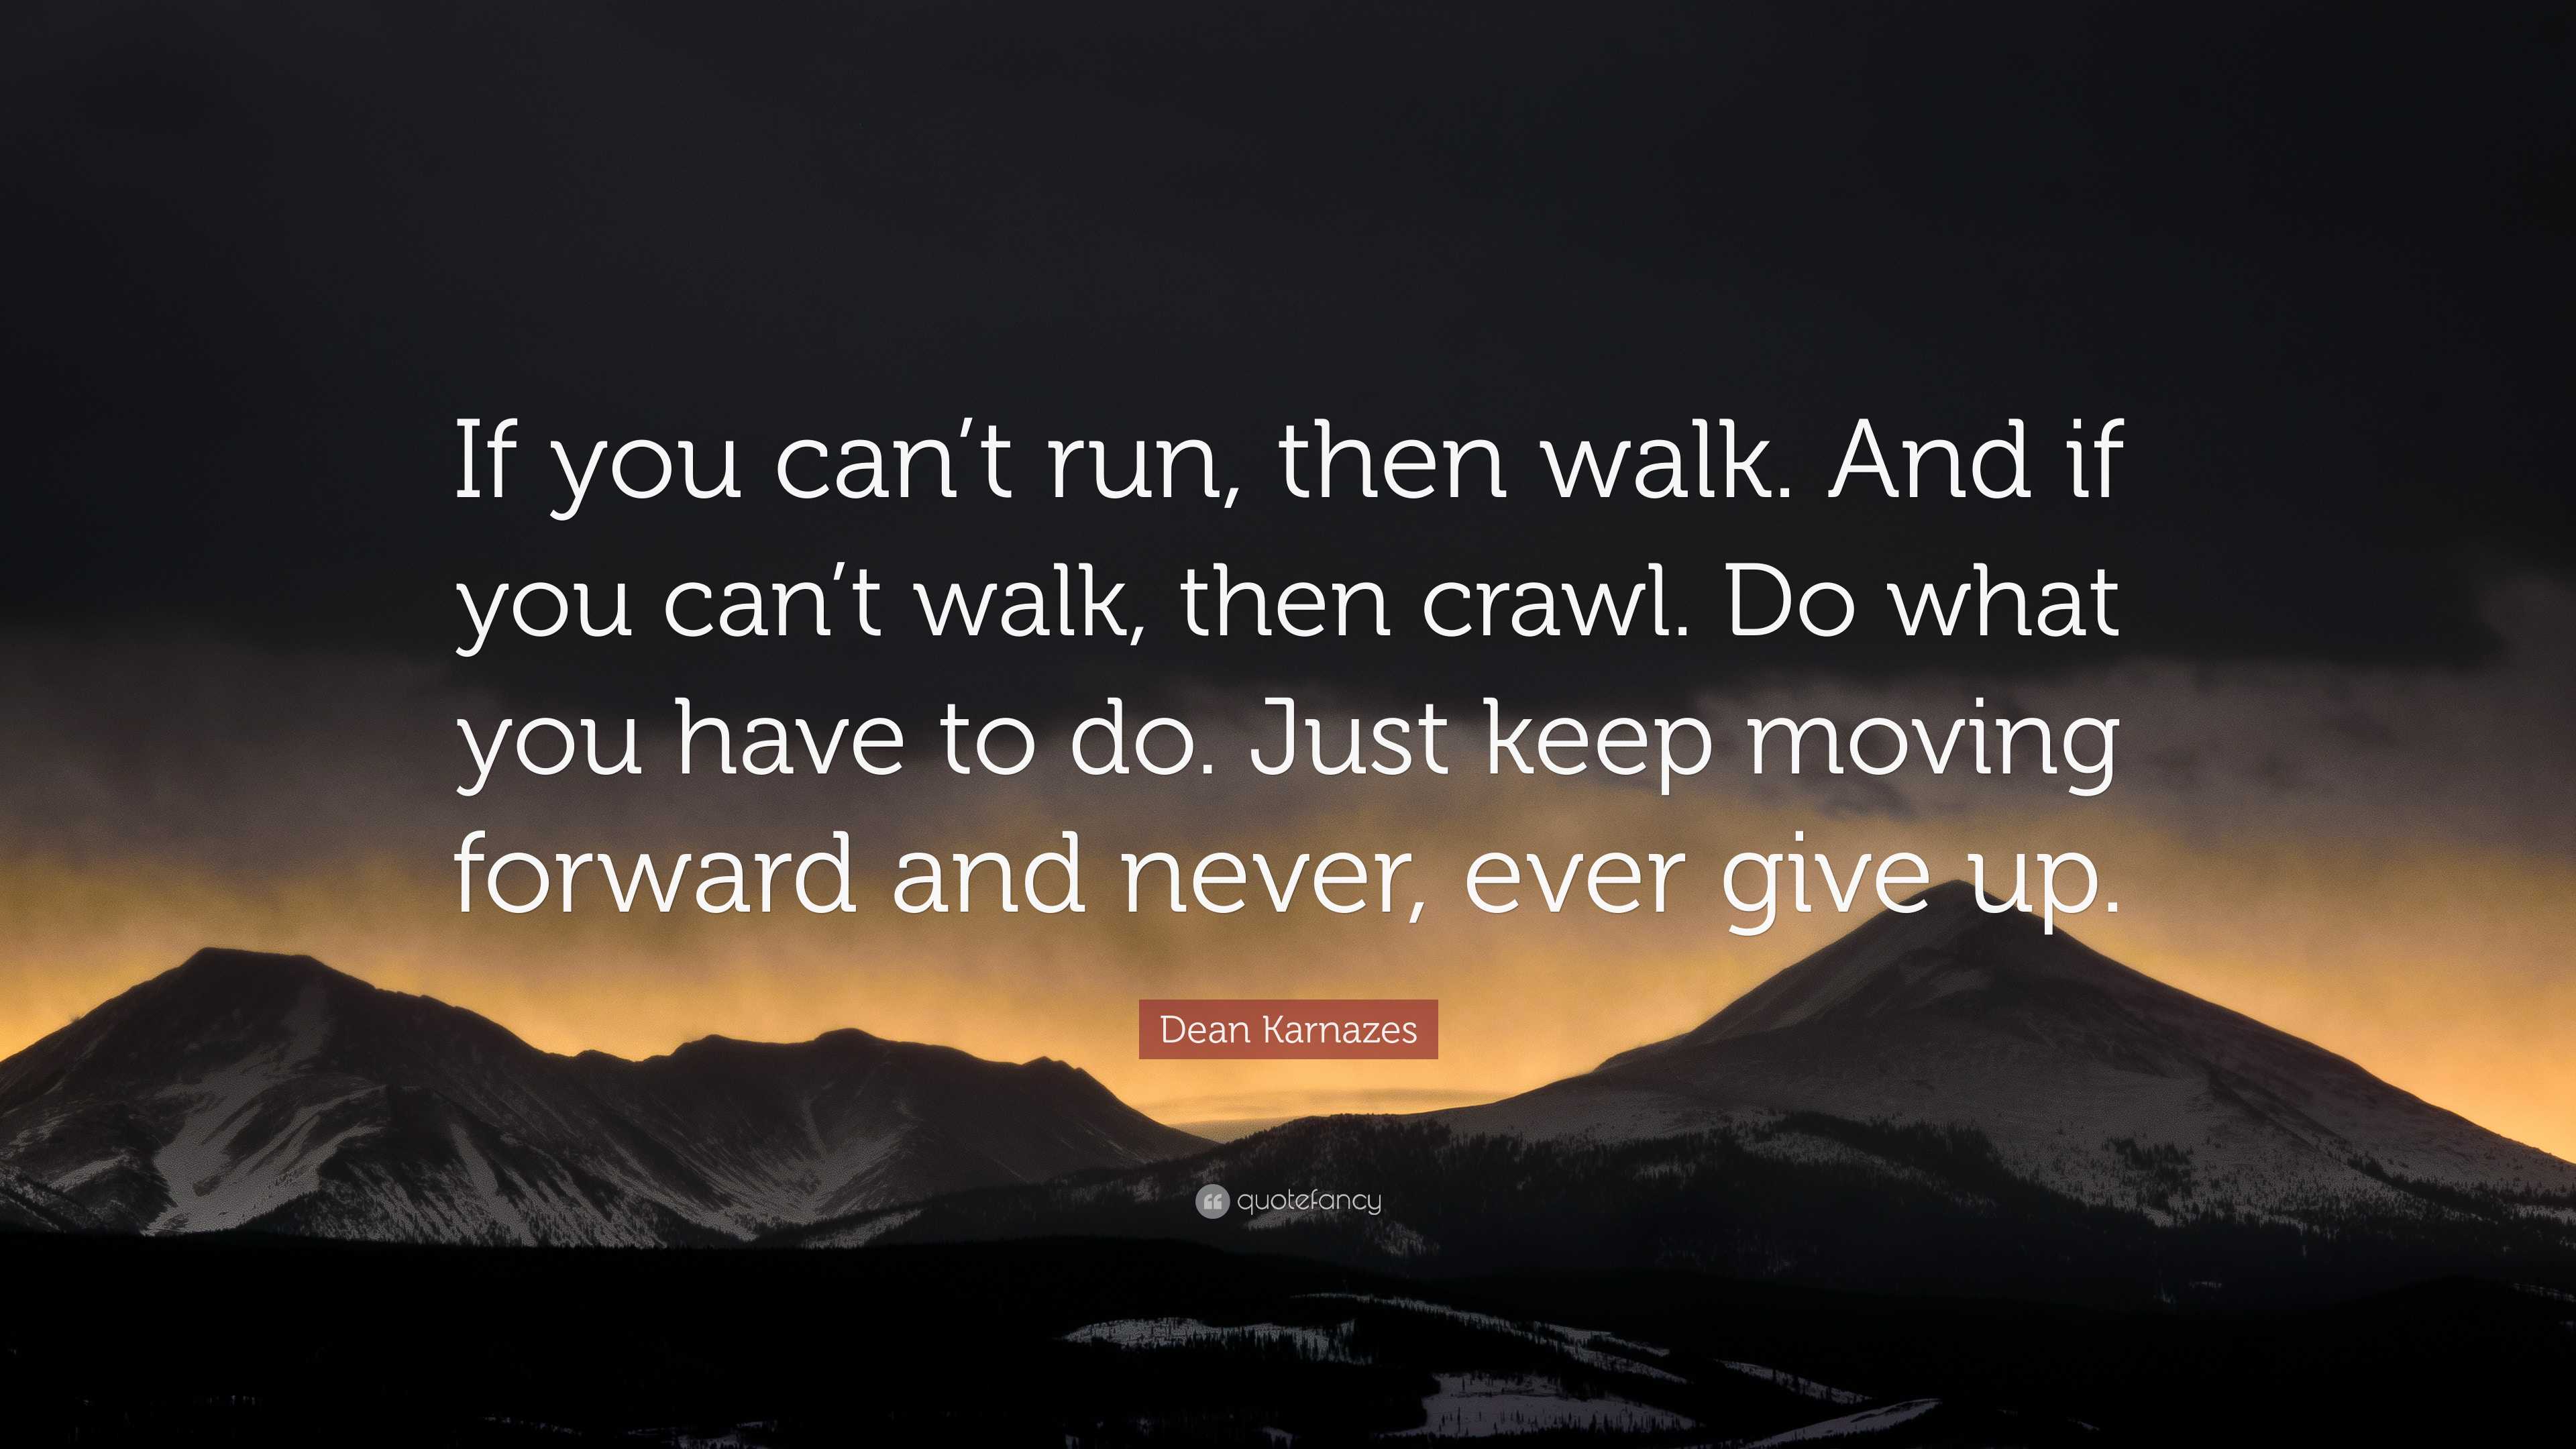 Dean Karnazes Quote: “If you can’t run, then walk. And if you can’t ...